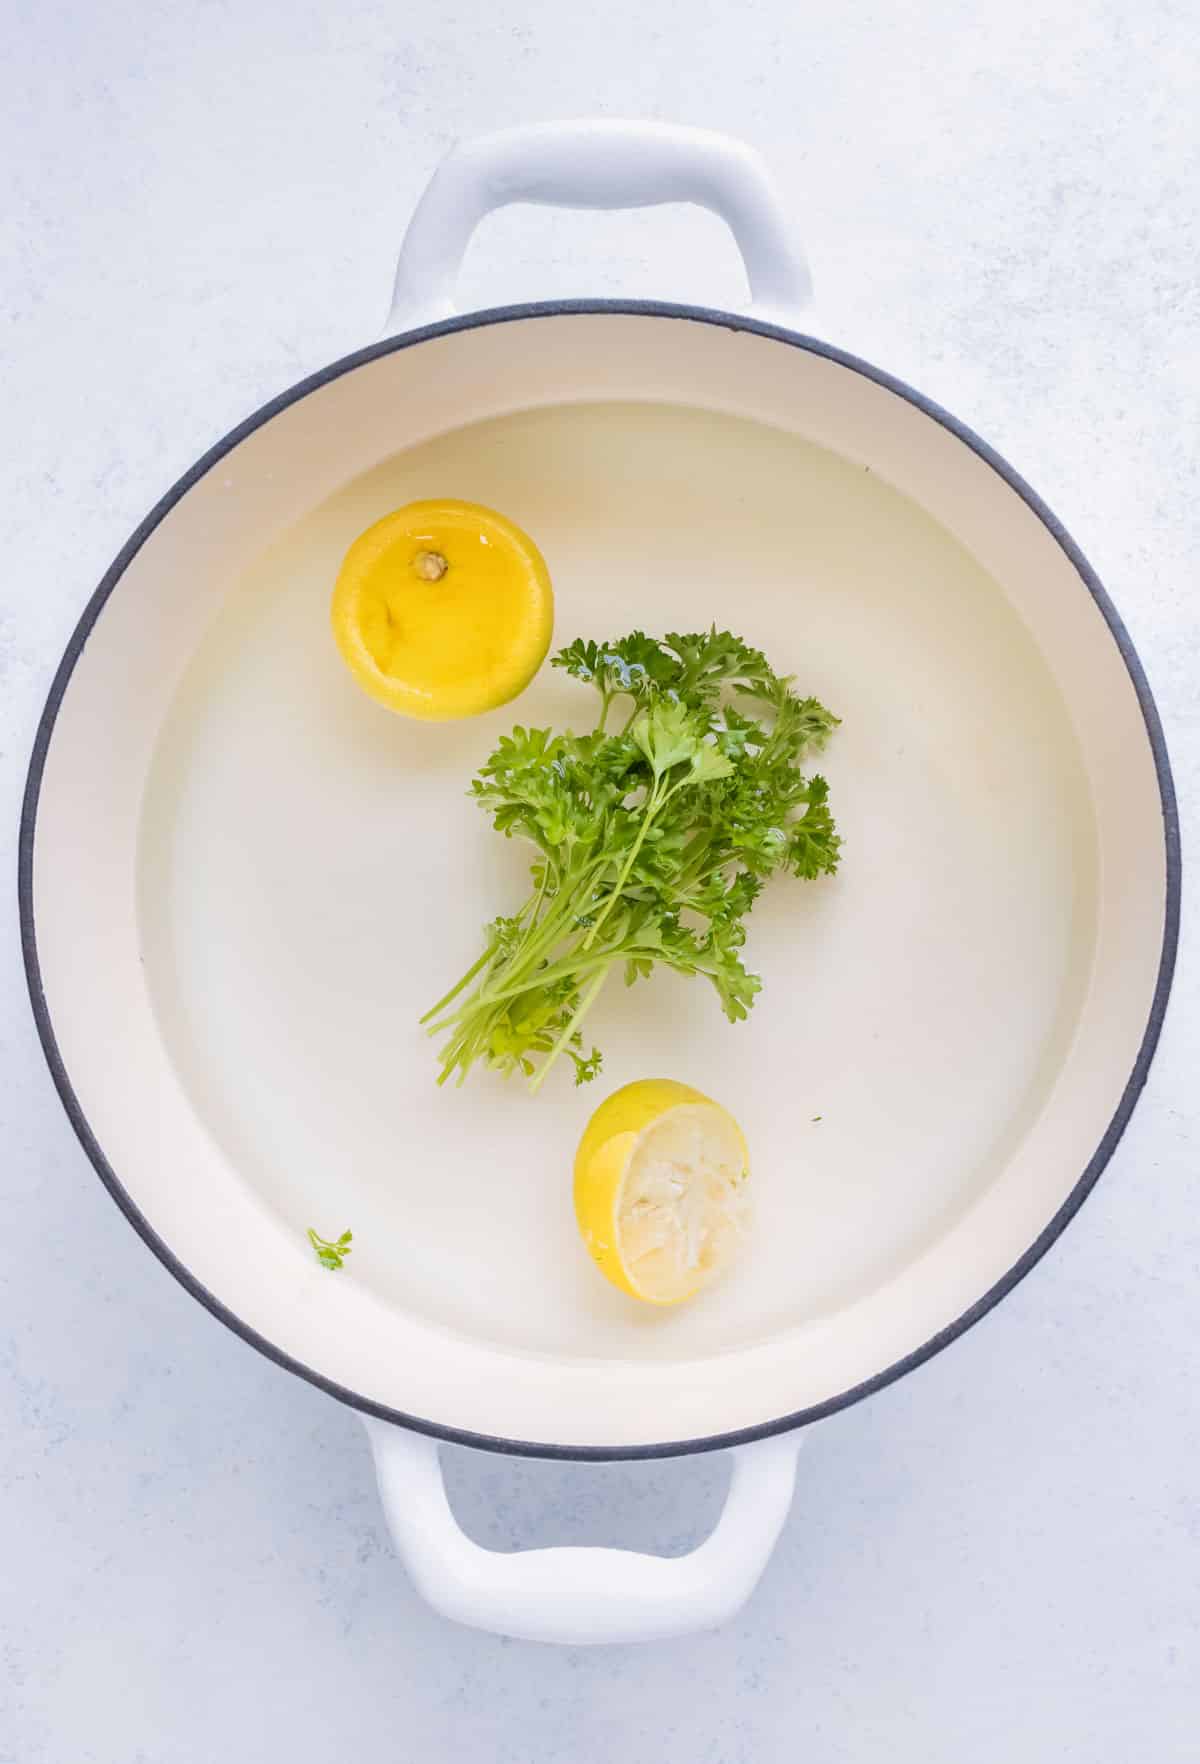 Water, lemons, parsley, salt, and sugar are placed in a pot.